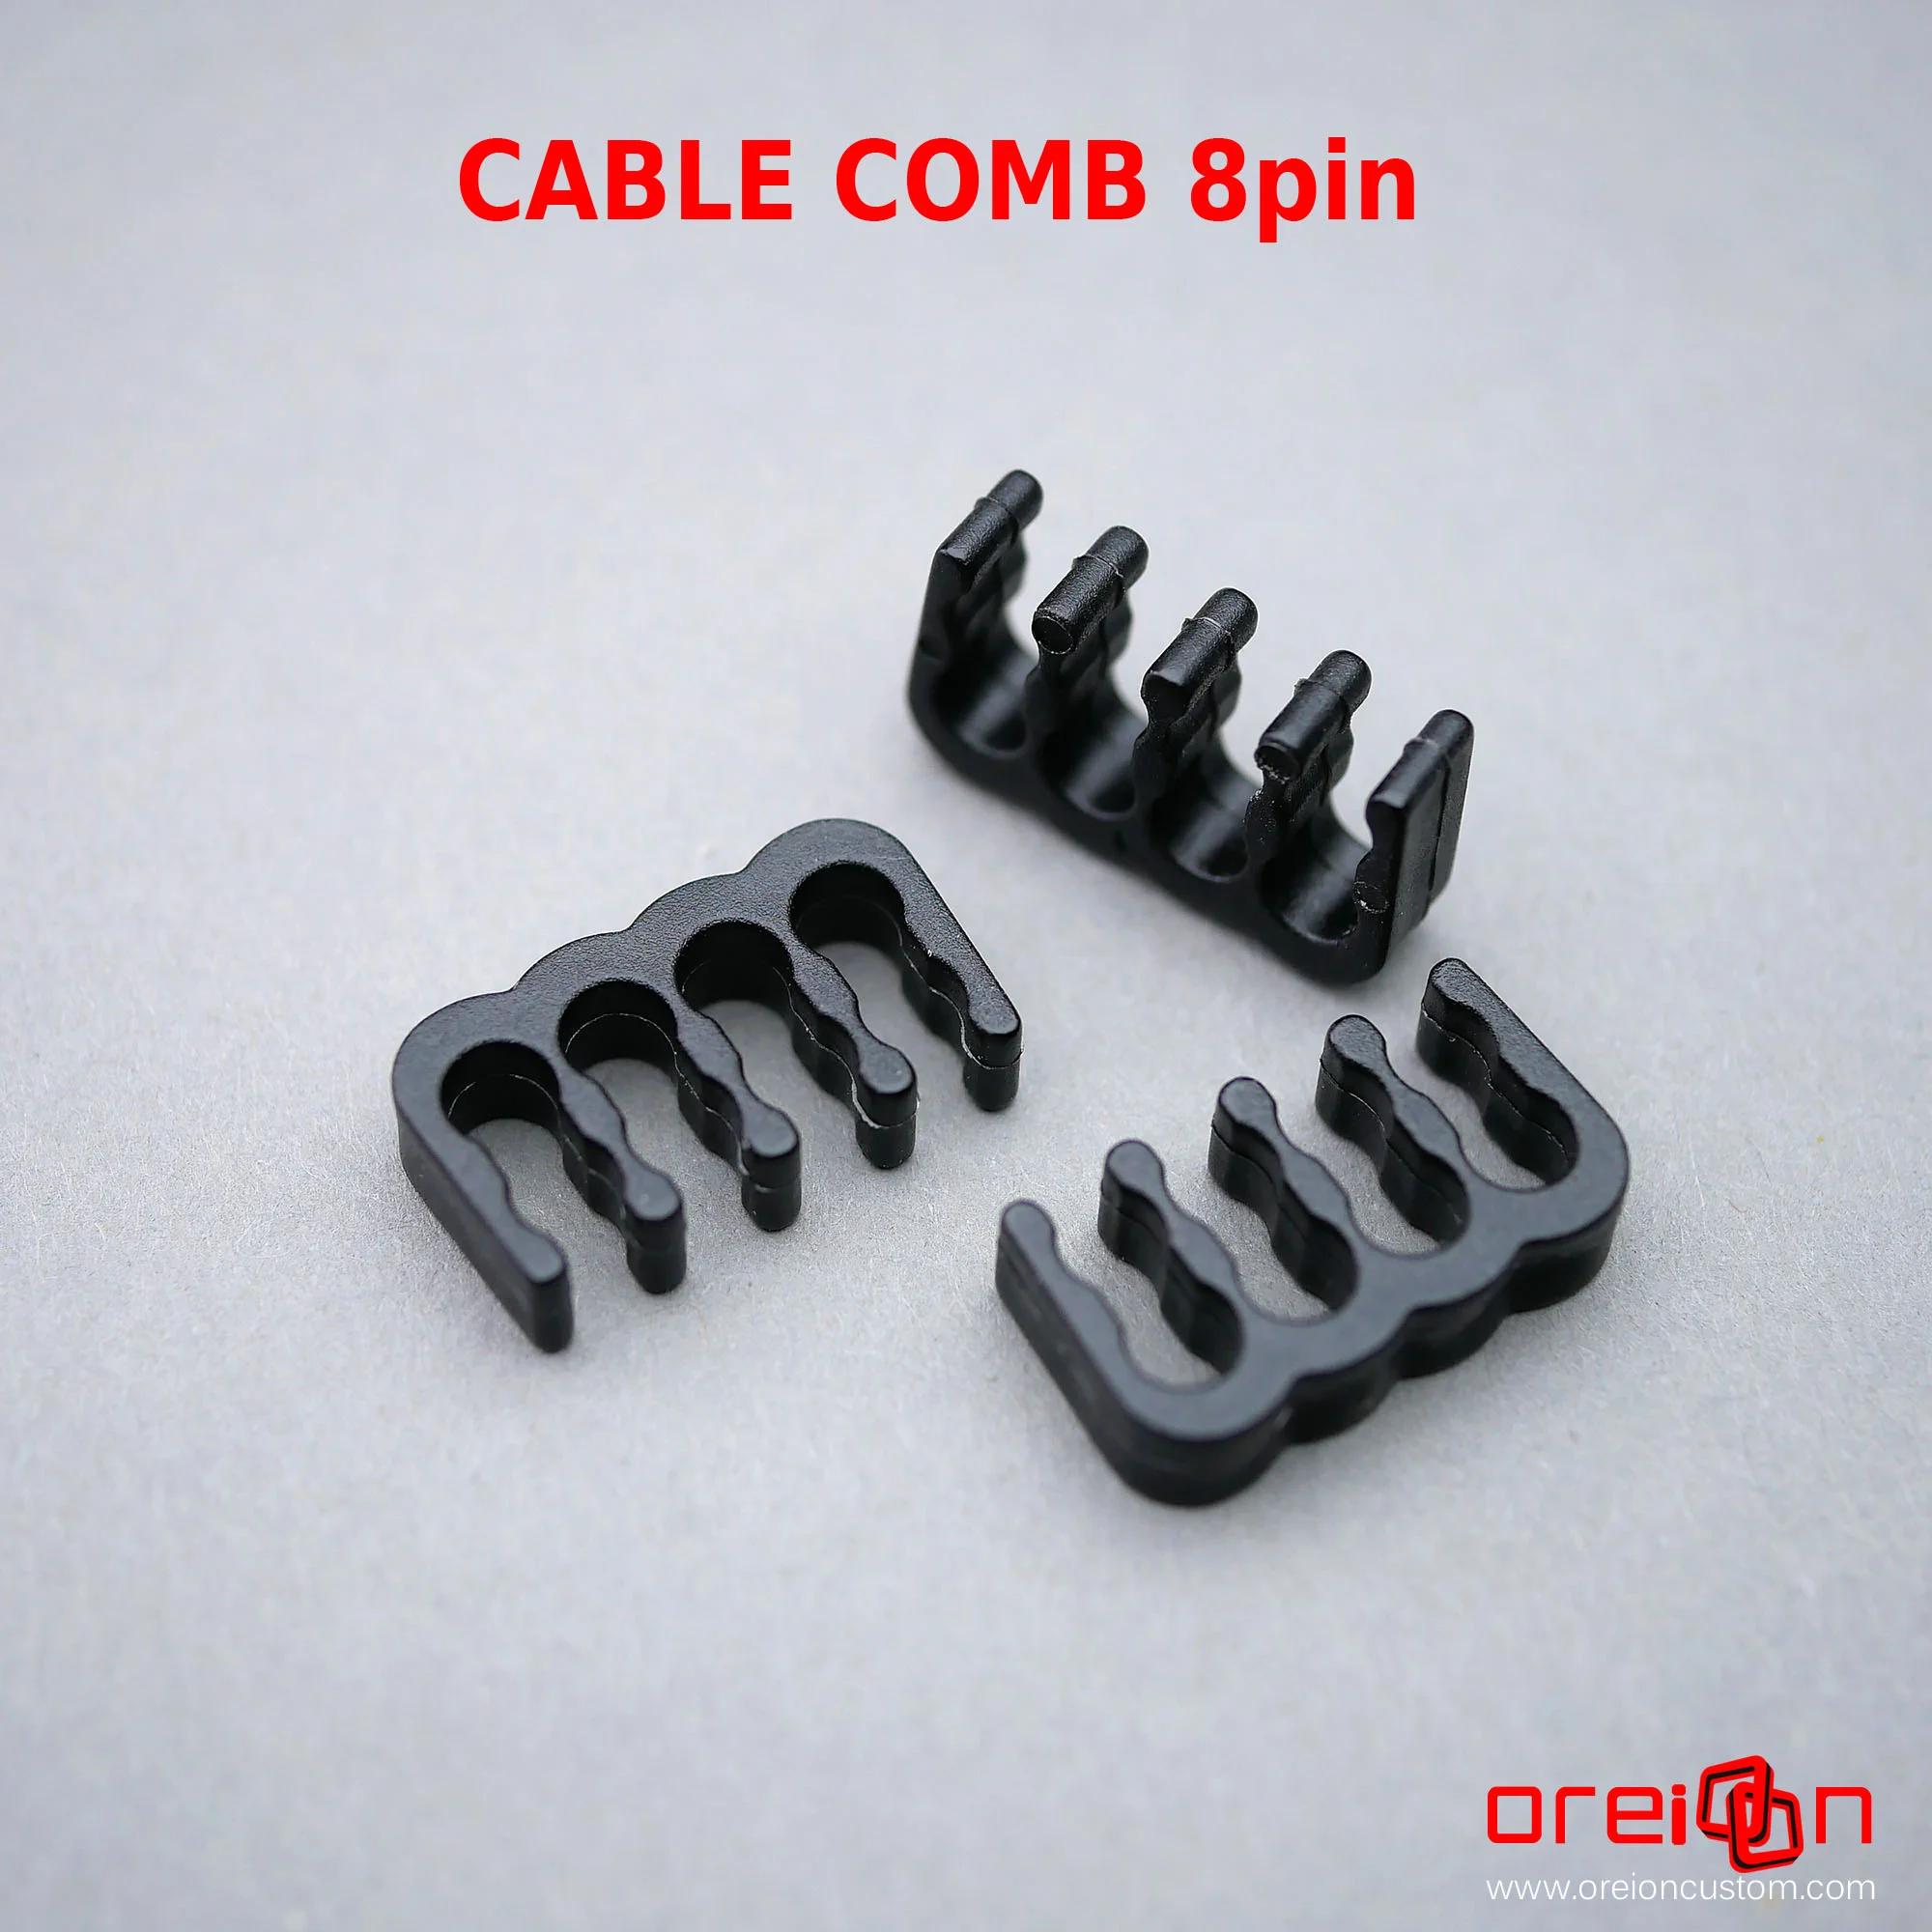 CABLE COMB 8pin